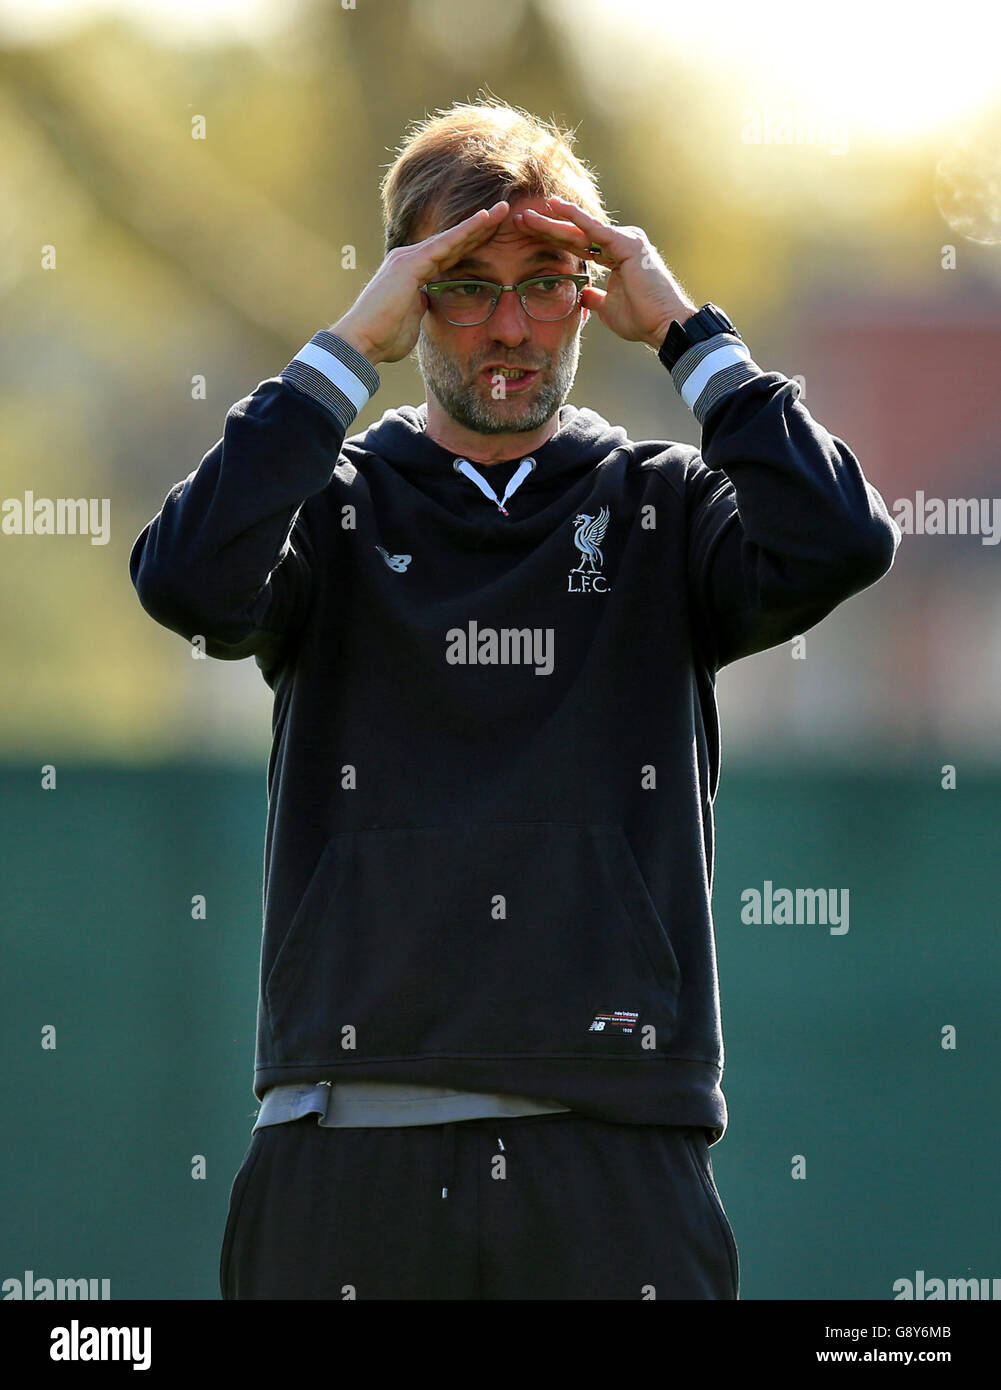 Liverpool manager Jurgen Klopp during a training session at Melwood Training Ground, Liverpool. Stock Photo